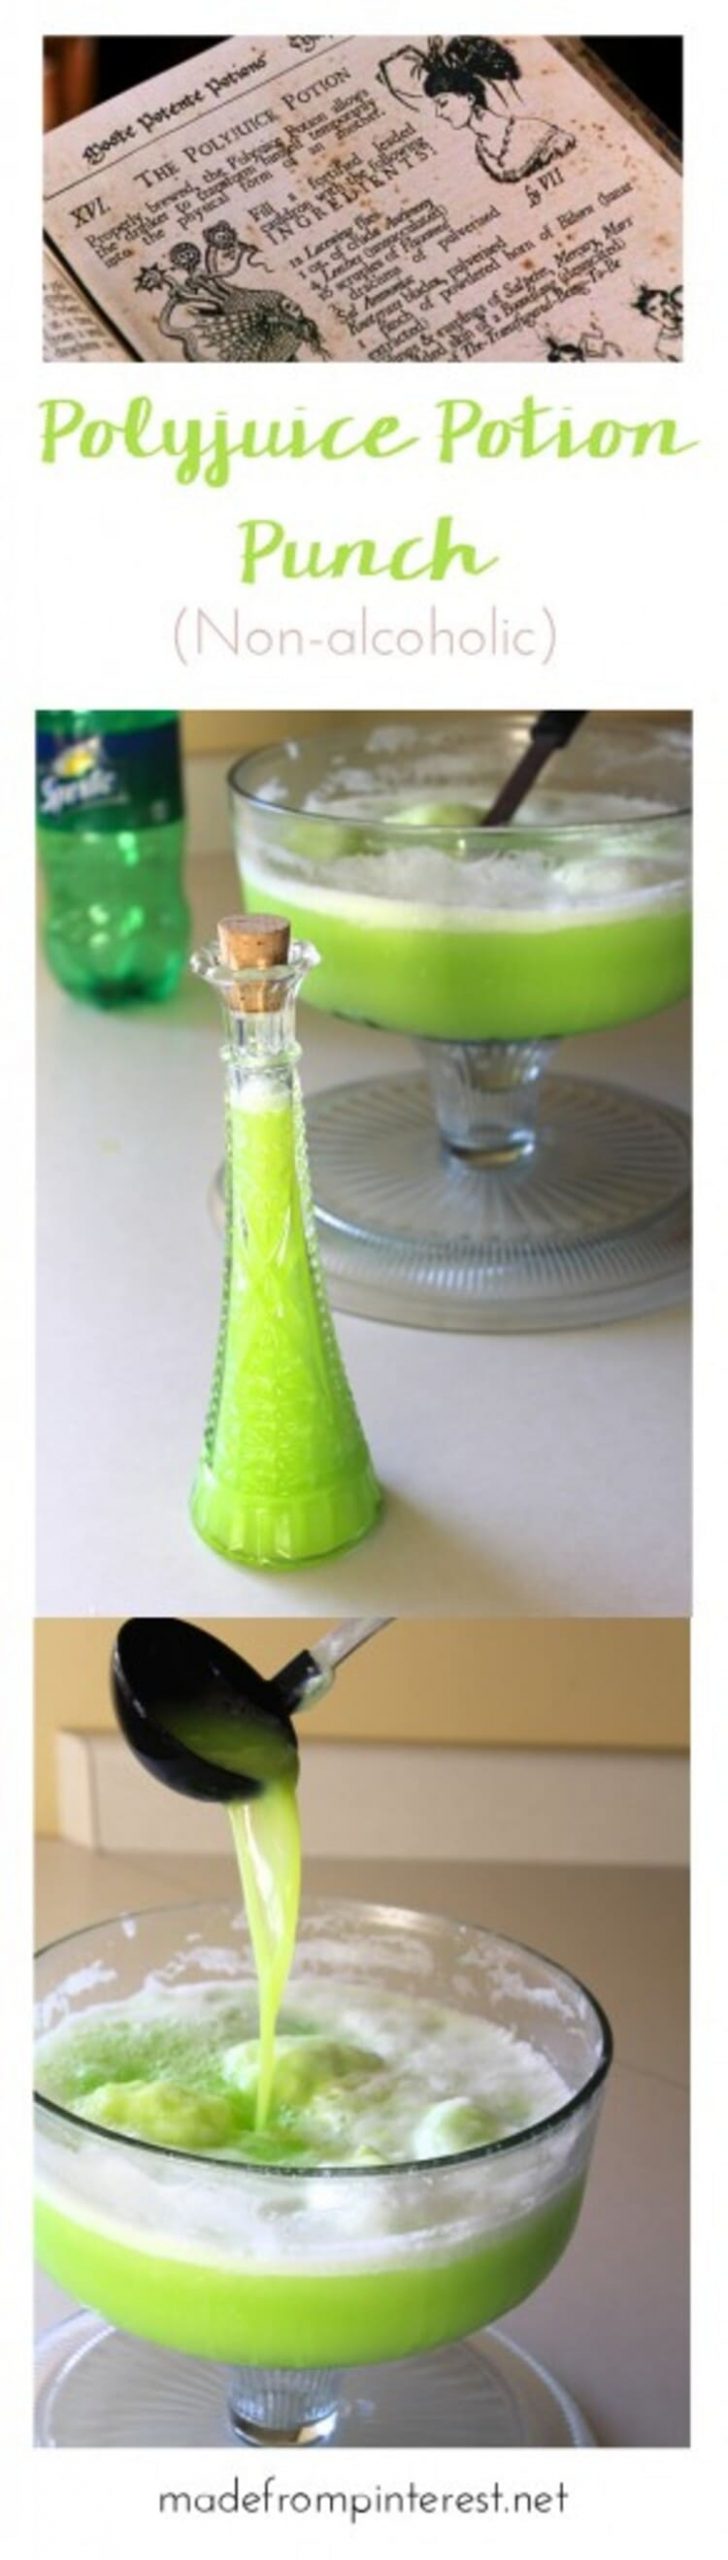 a collage photo of polyjuice potion recipe for a party punch in a bright green color